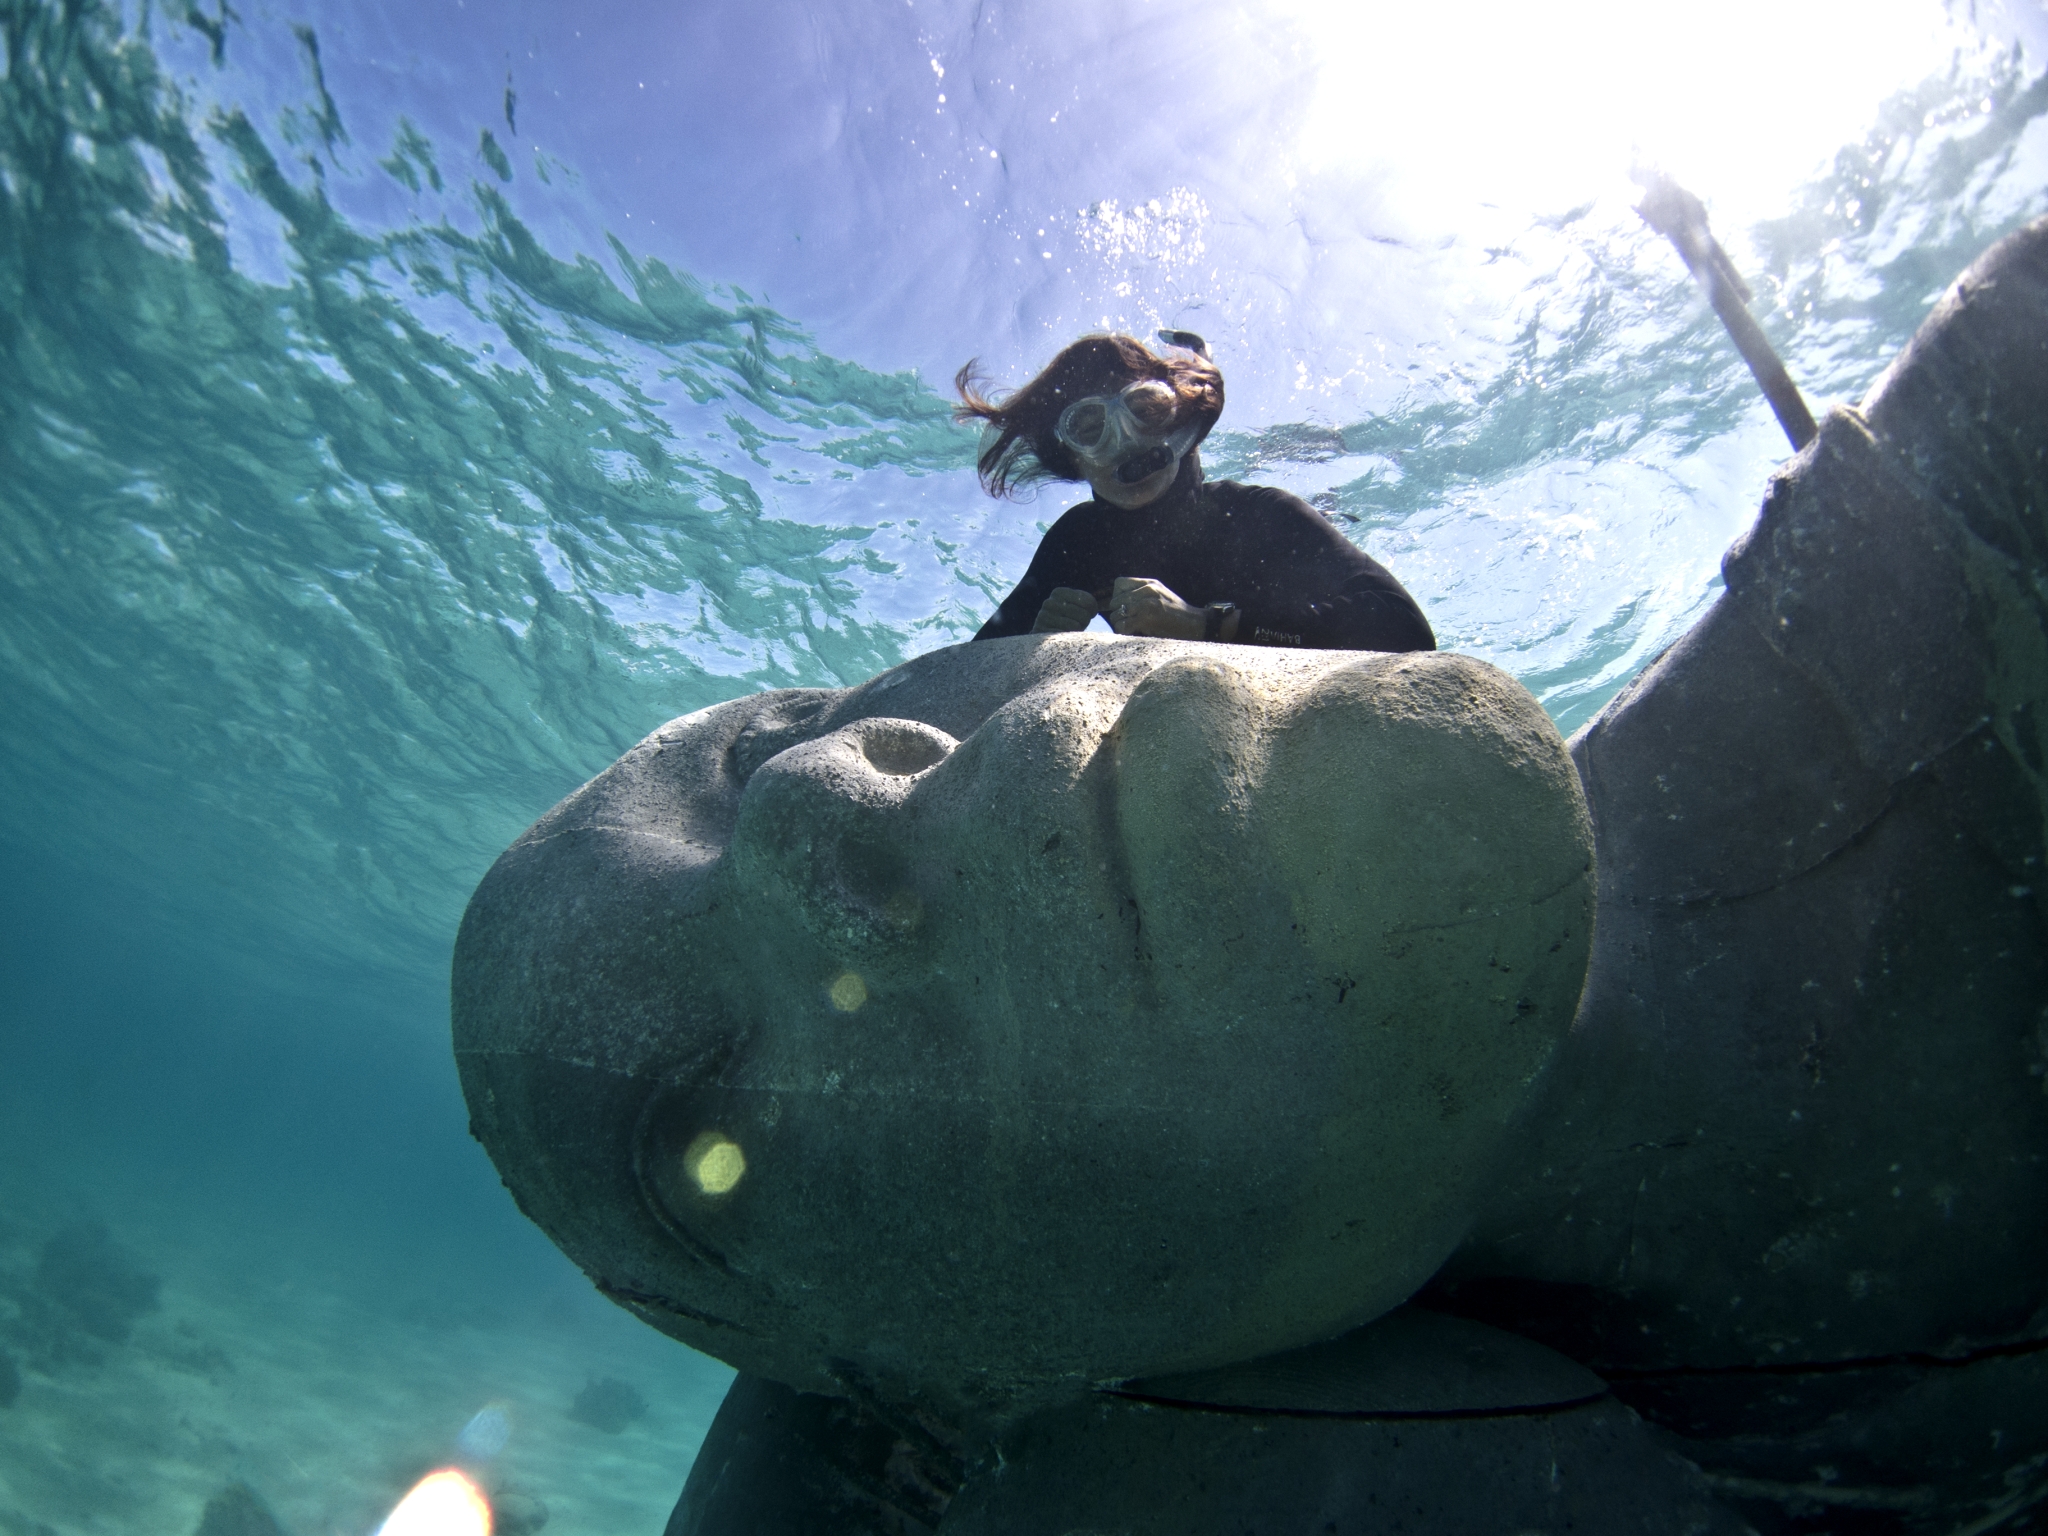 Where Is The World’s Largest Underwater Sculpture